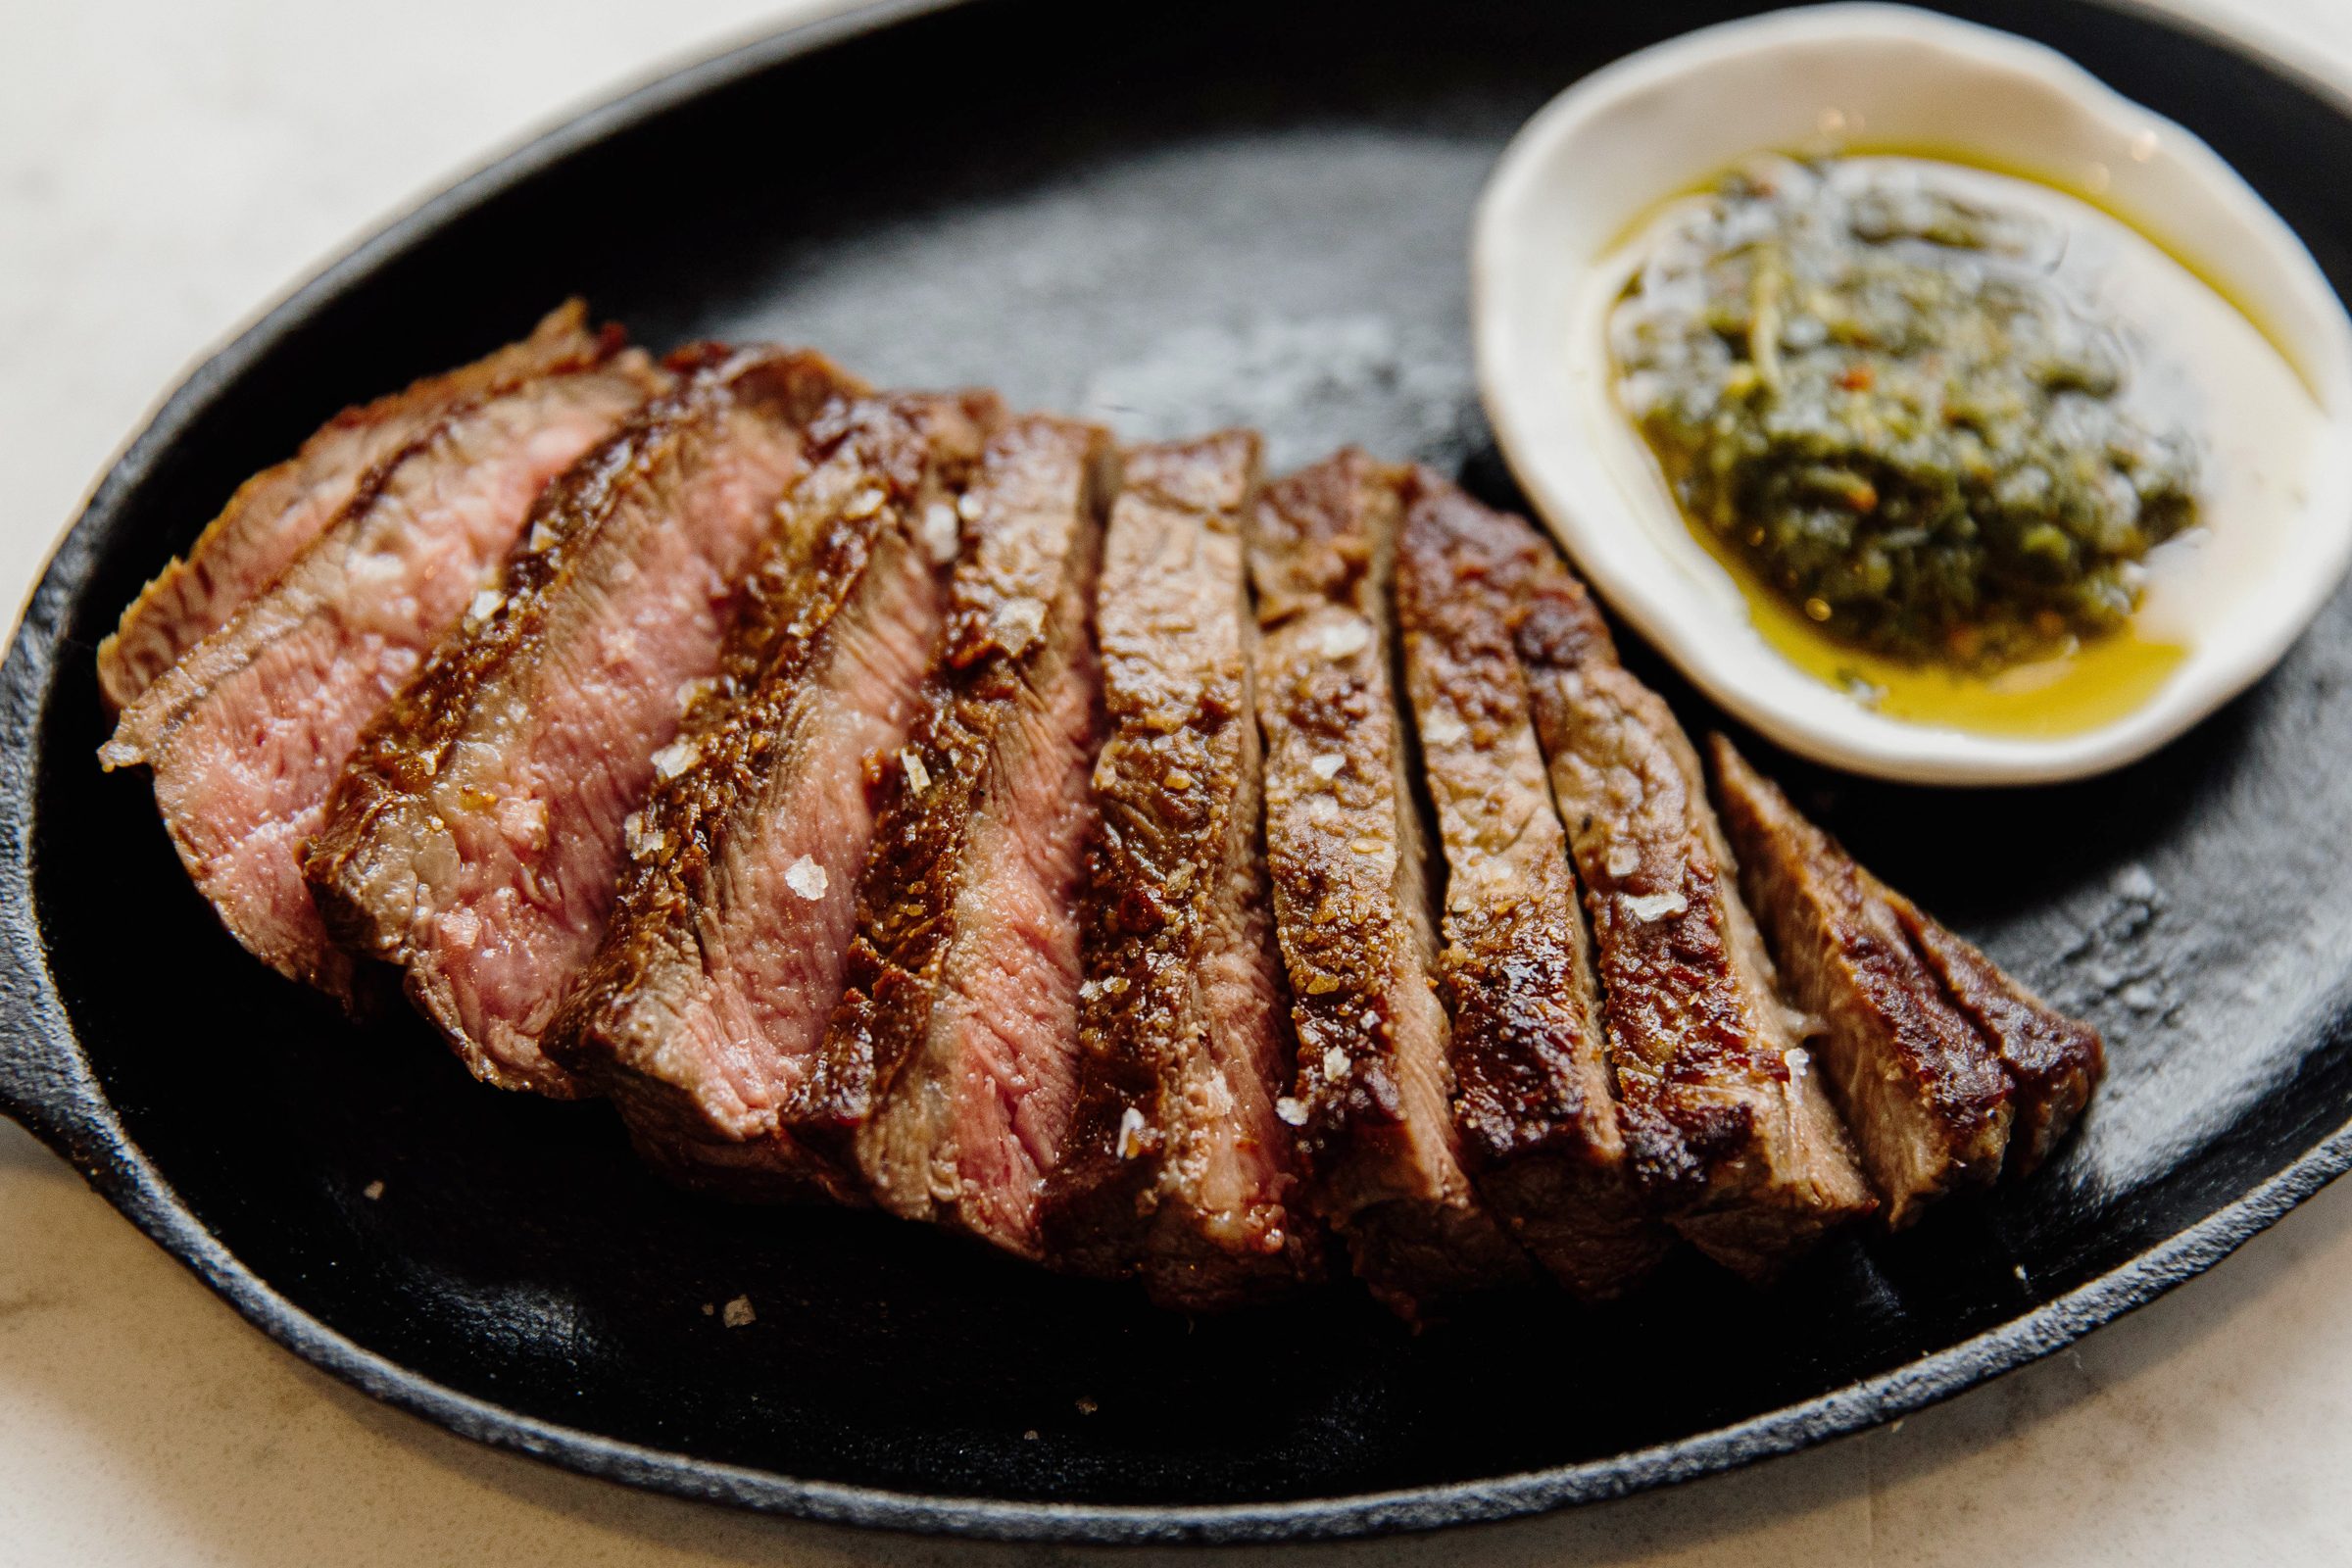 Searing Cast Iron Vs. Stainless Steel - What's Best For Your Steak